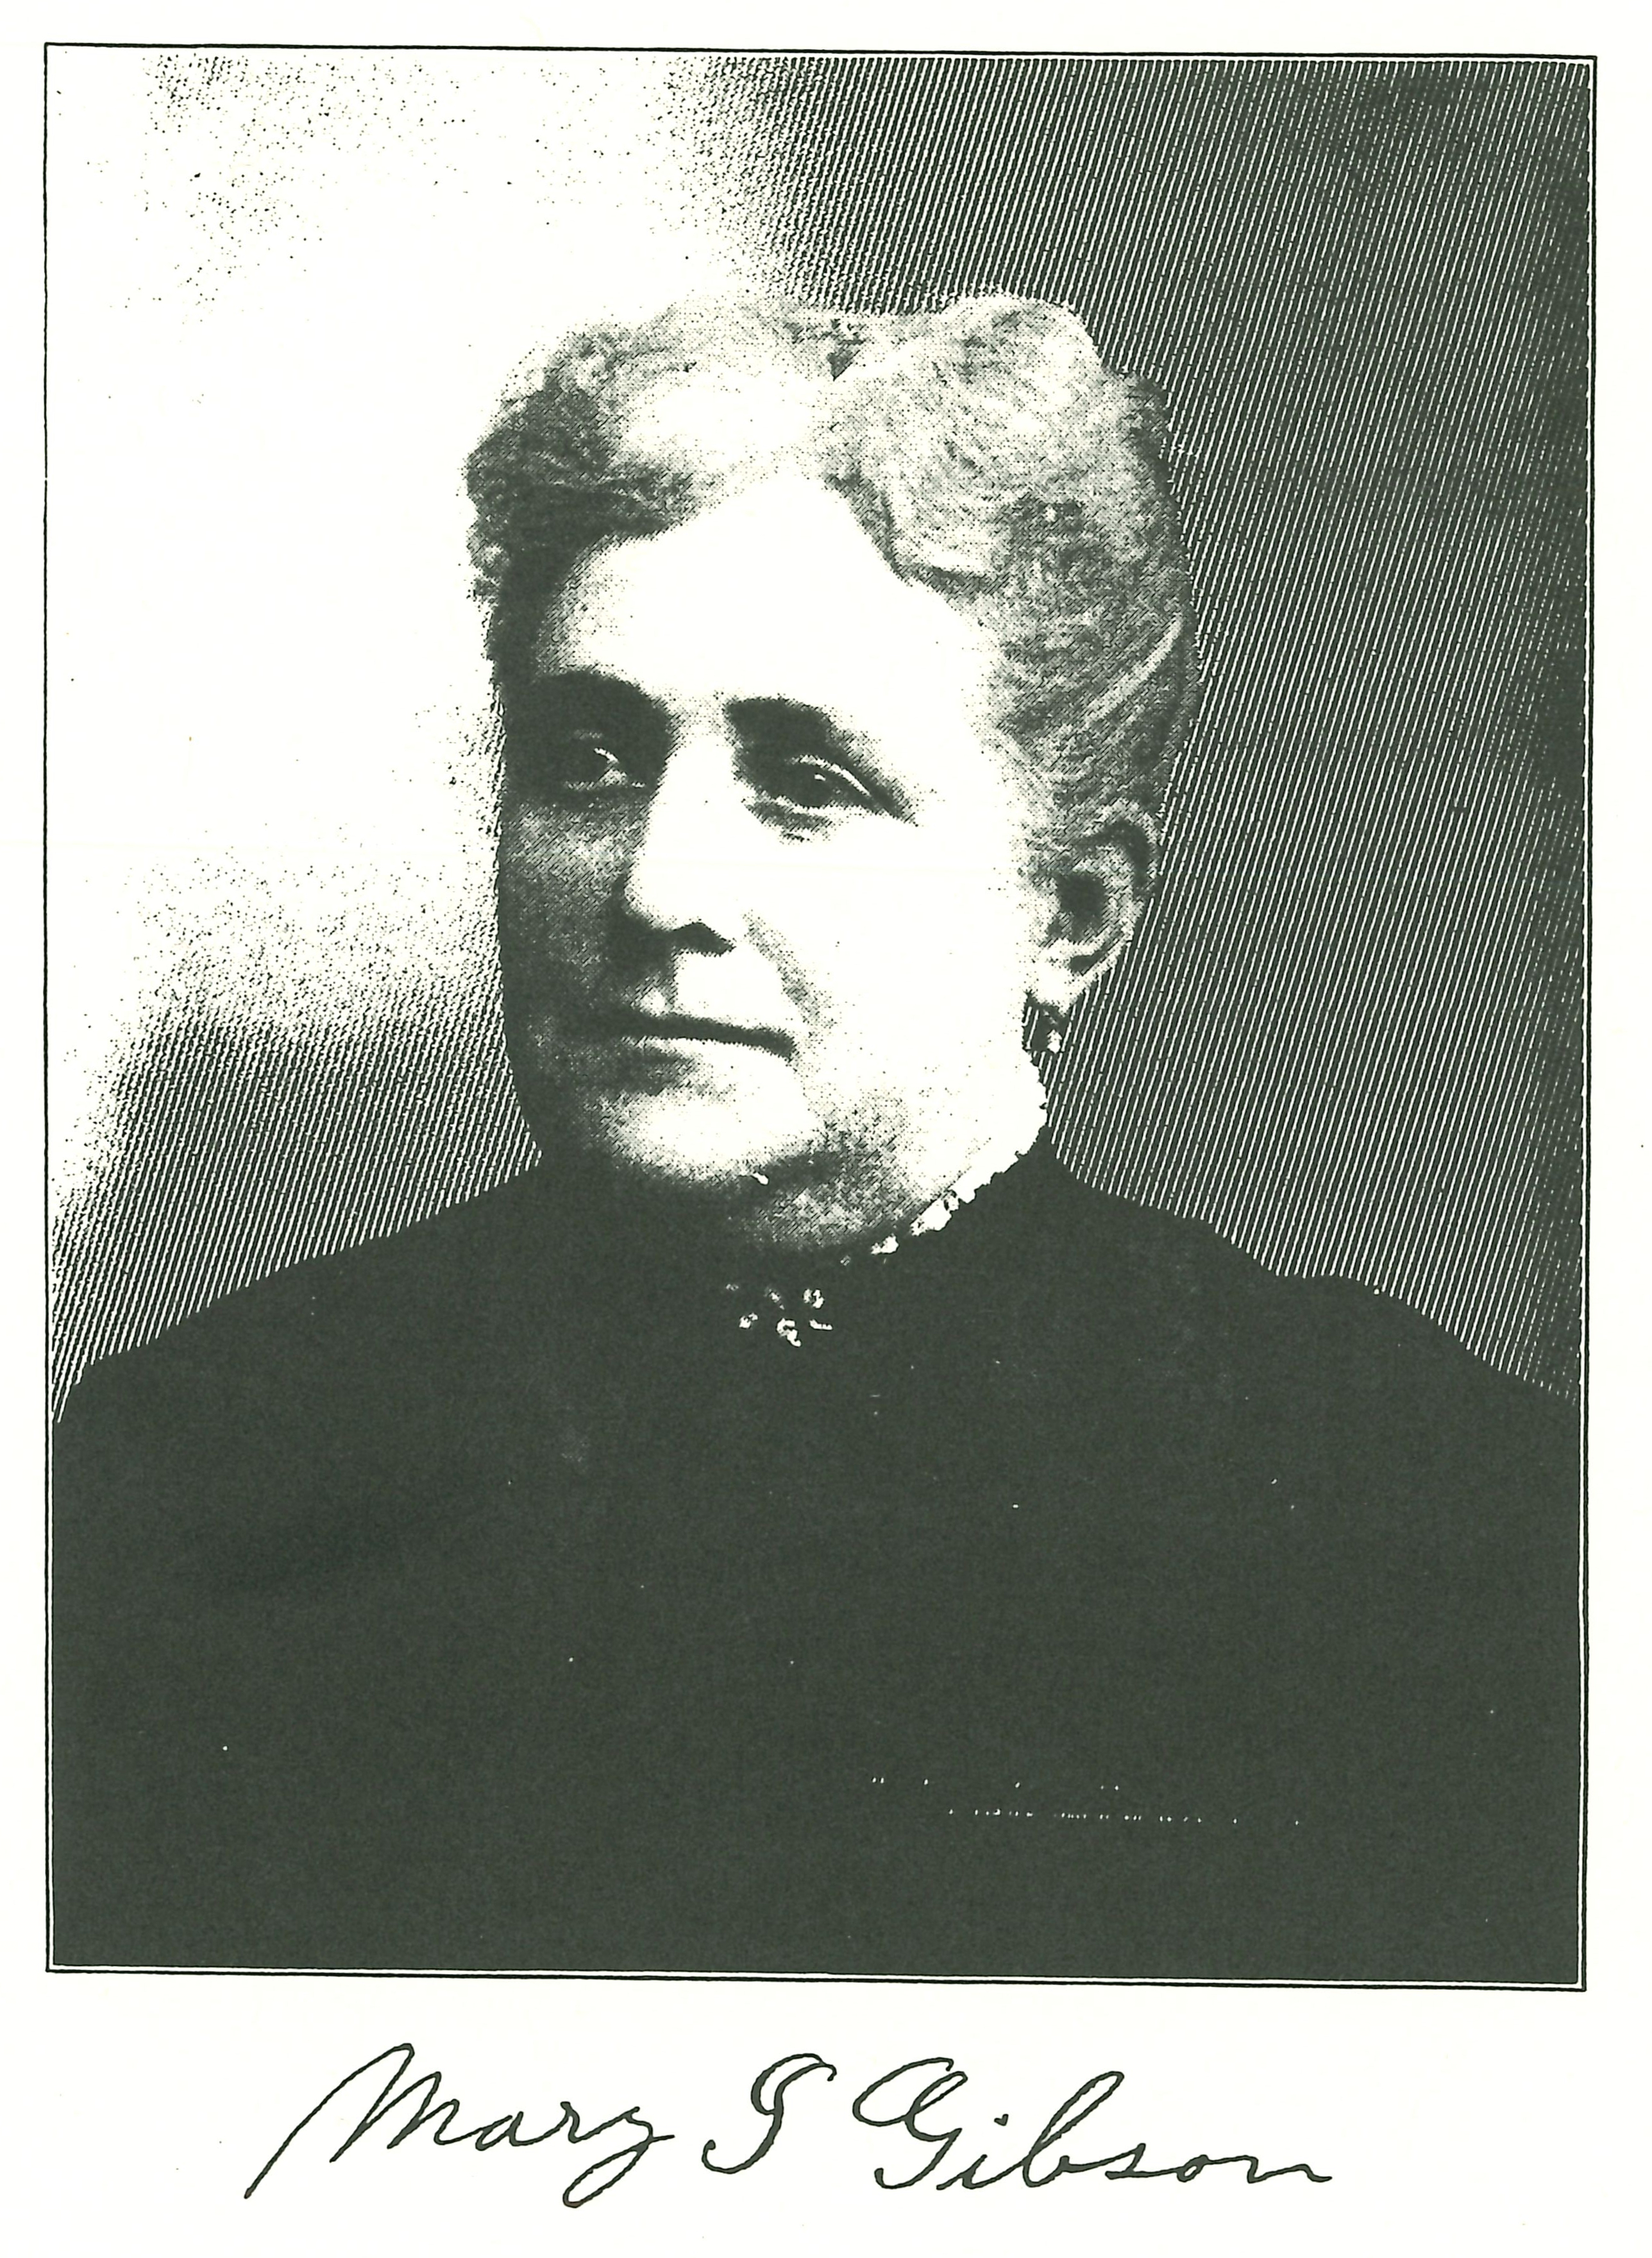 Mary I. Gibson, History of Yolo County, Gregory, 1913. pg. 281. Courtesy of Yolo County Archives